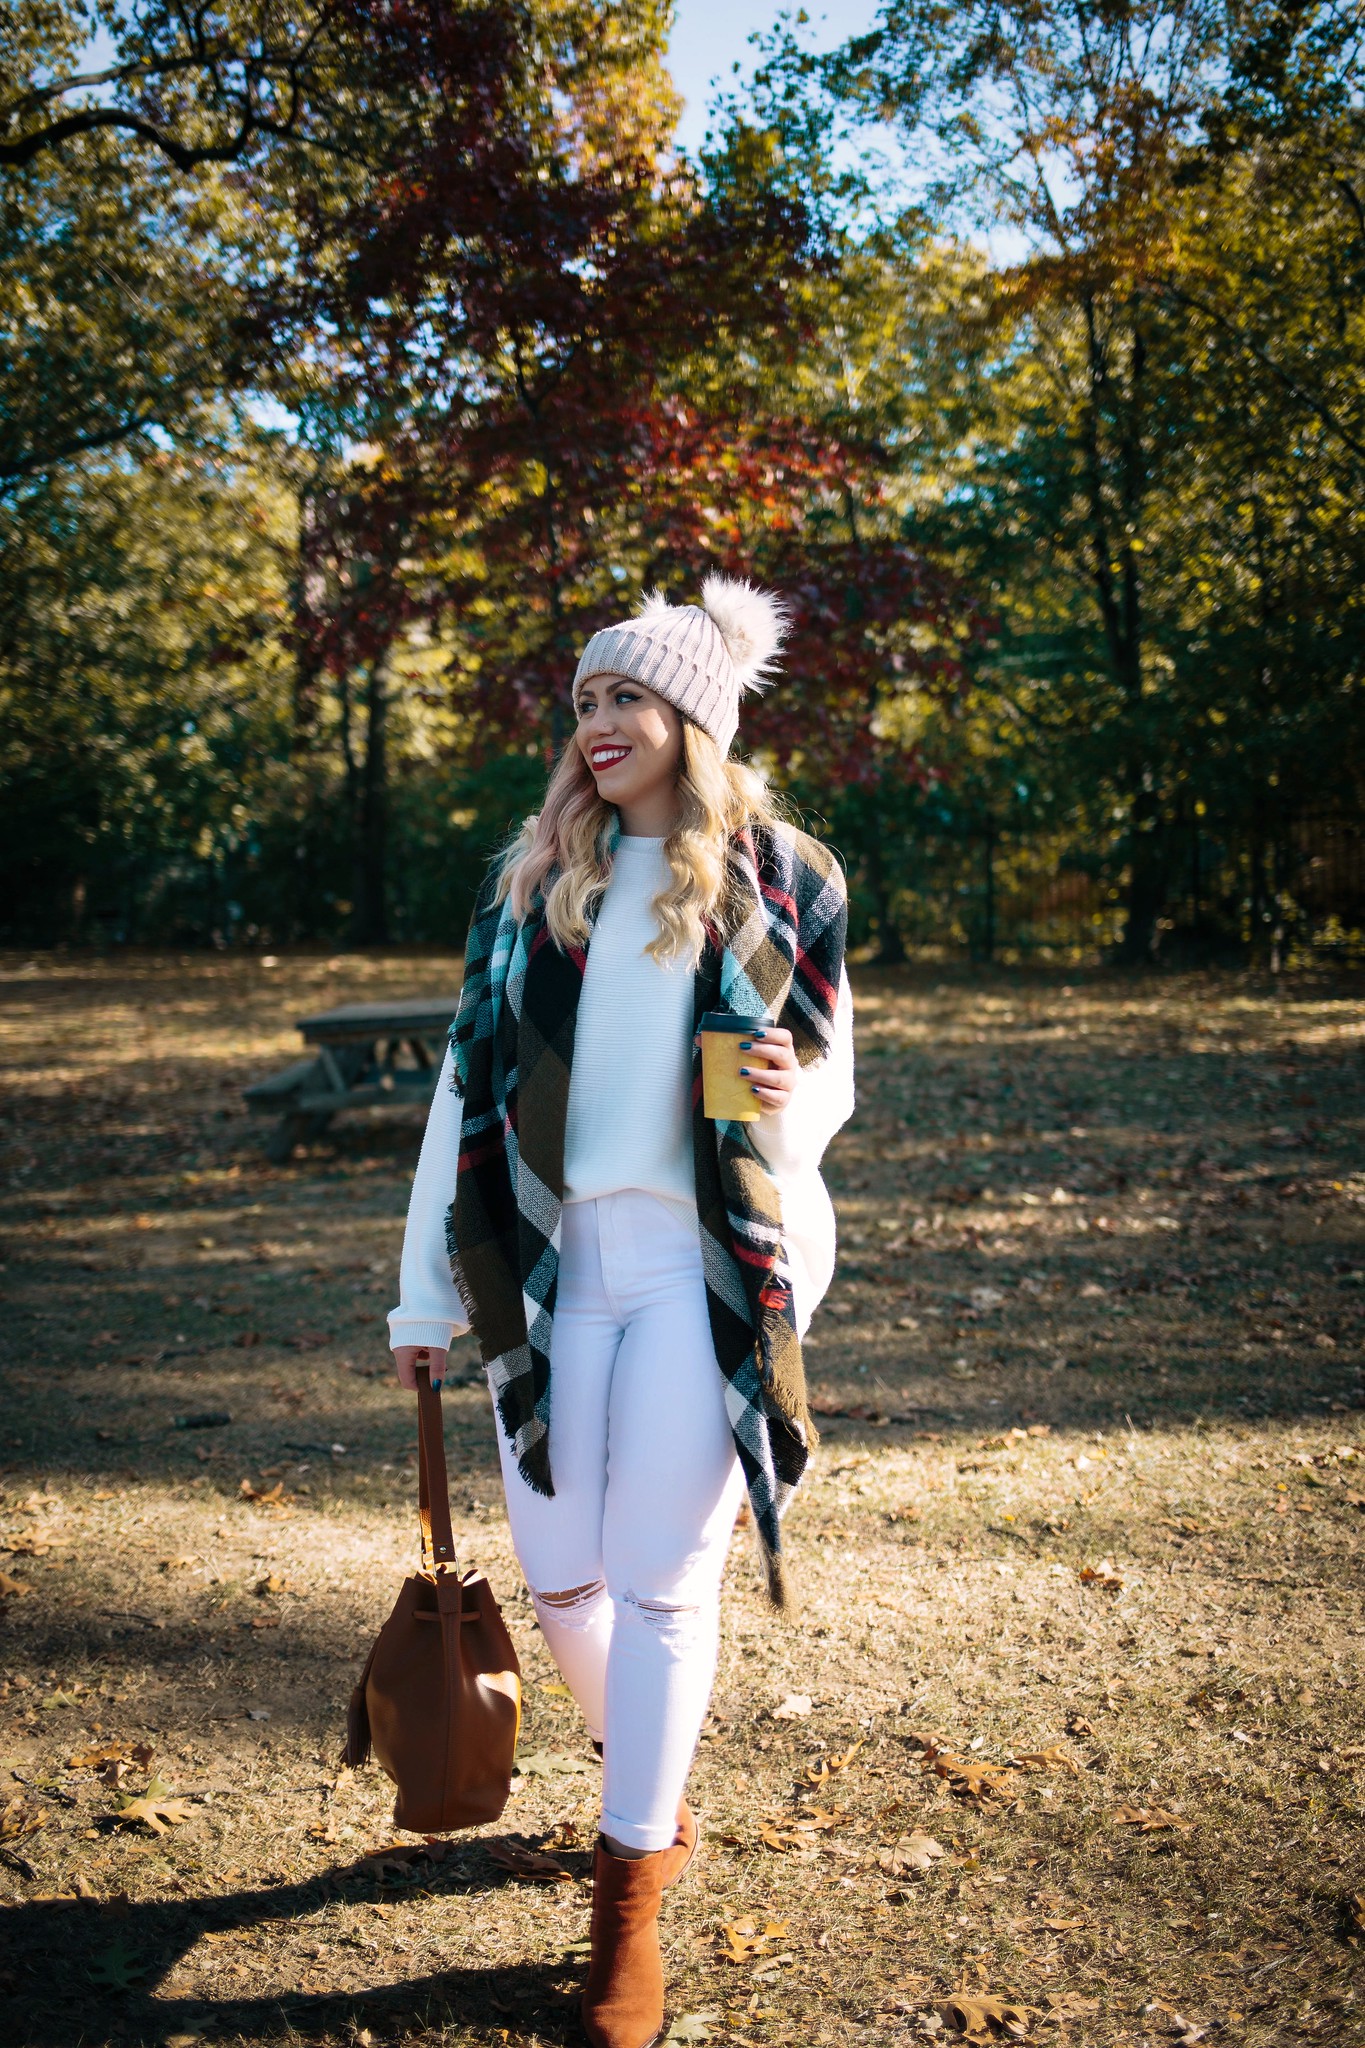 Winter White Outfit with Plaid Scarf, Pom Pom Hat & Cognac Suede Boots | Easy Fall Outfits to Recreate | Fall Outfit Inspiration | Simple Fall Outfits | Winter Fits | New York Fall Foliage